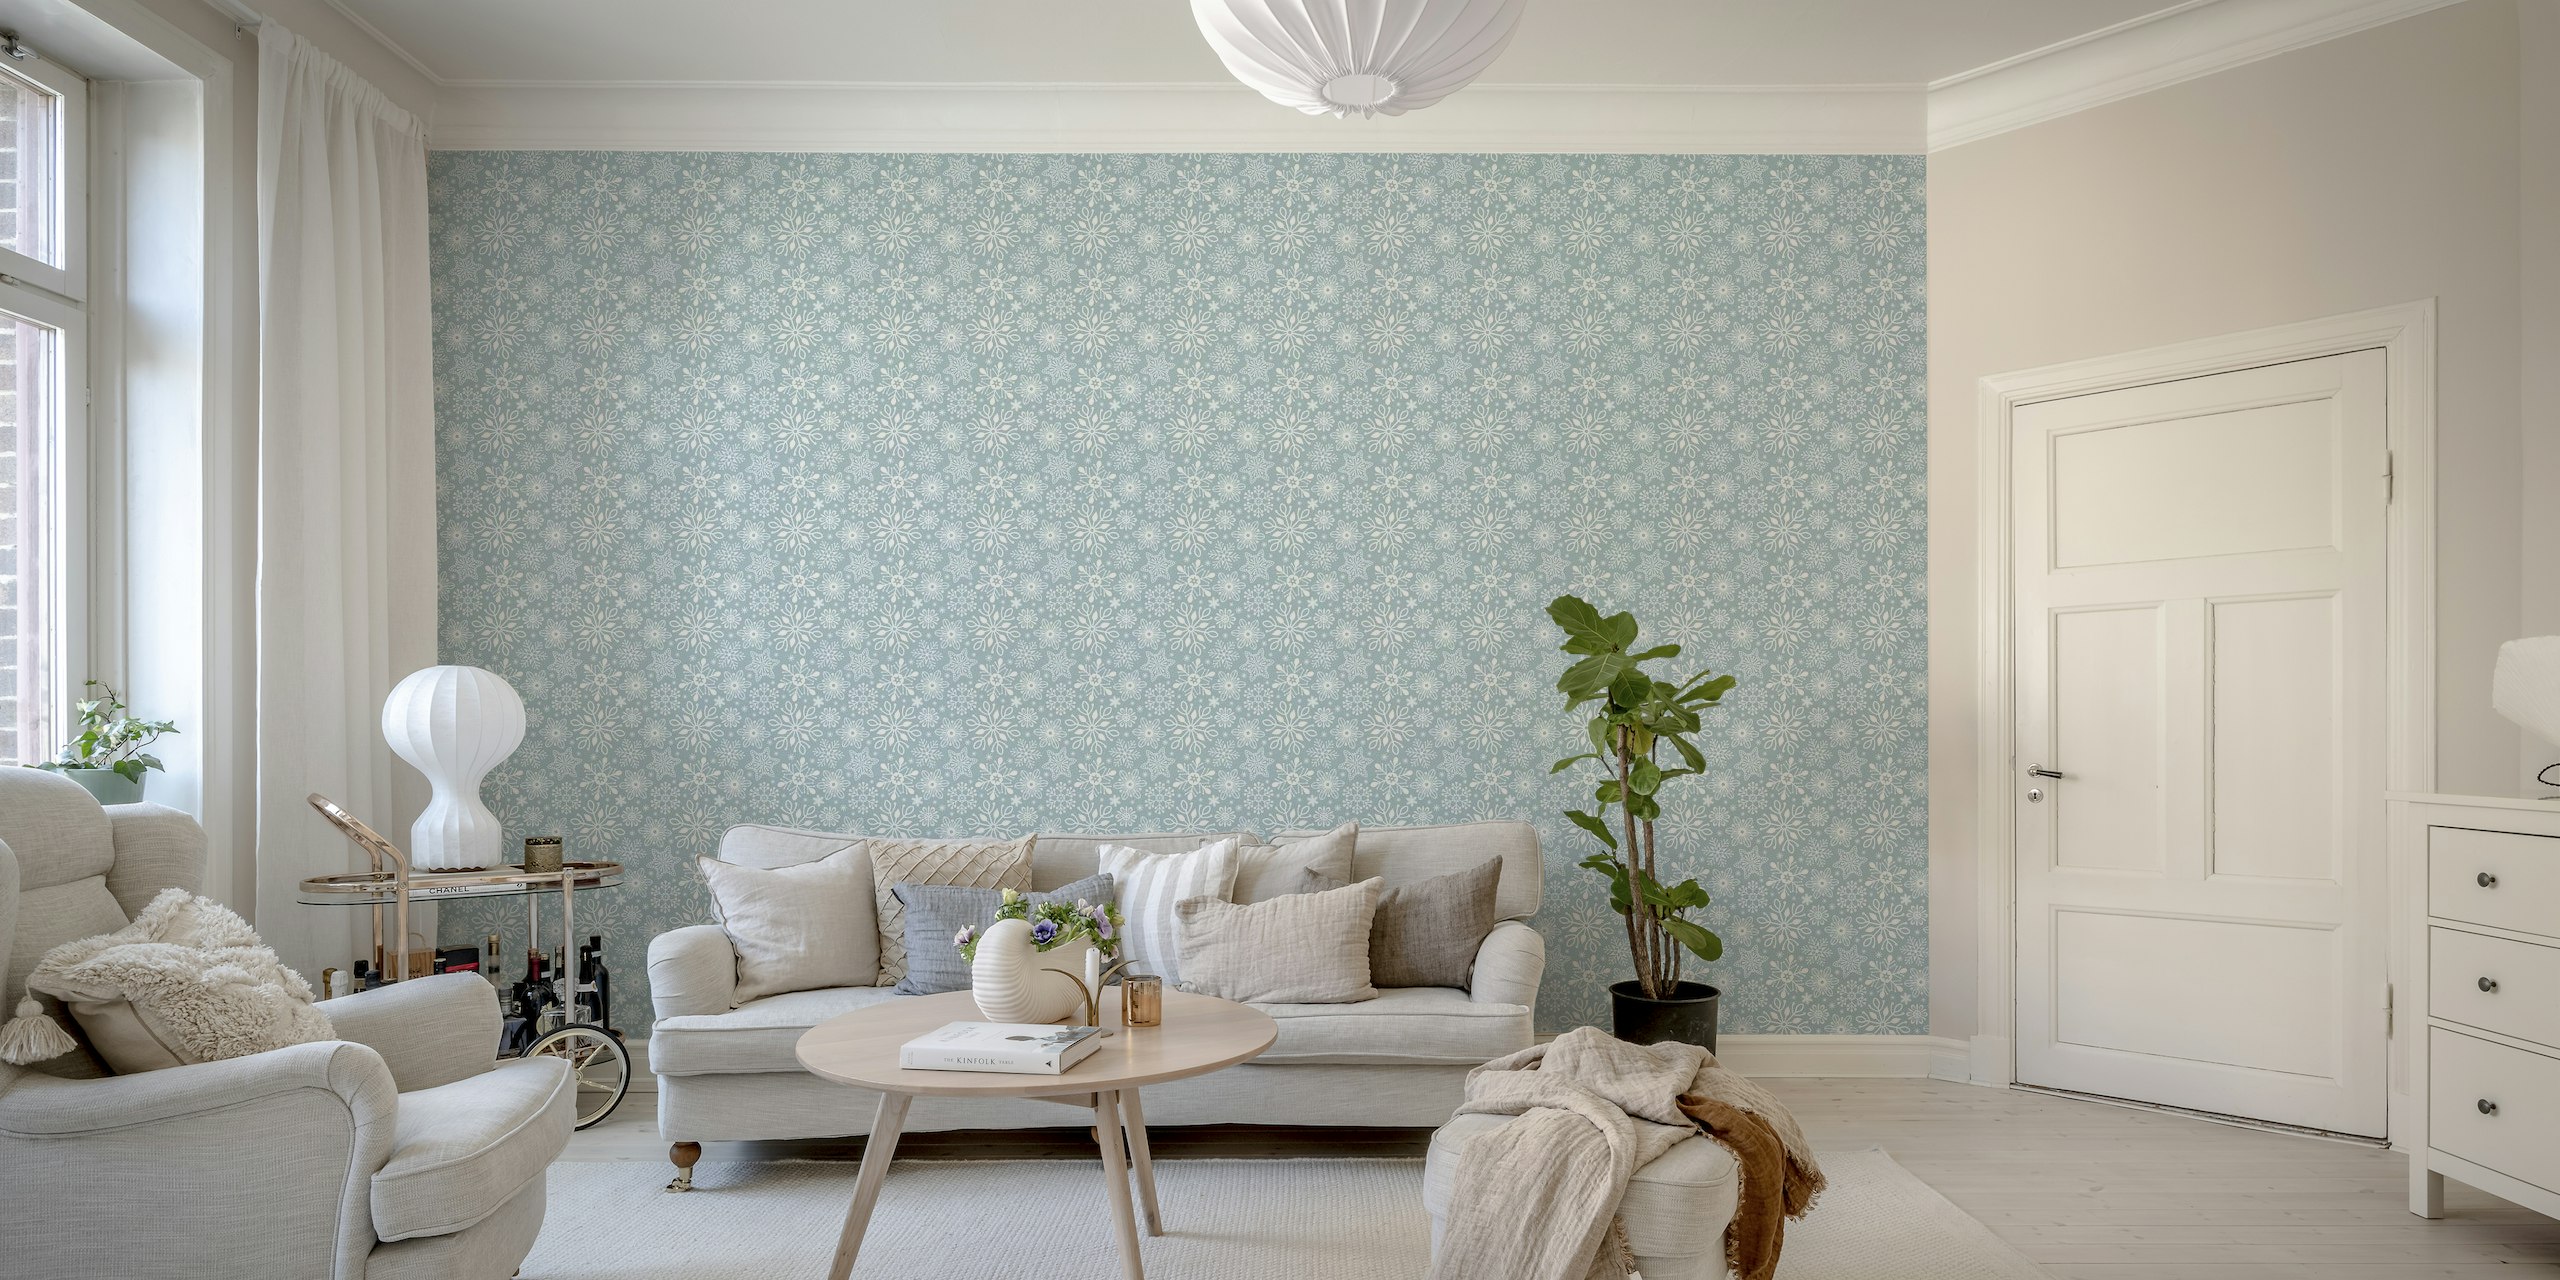 Elegant blue wall mural with white snowflake patterns for home decor